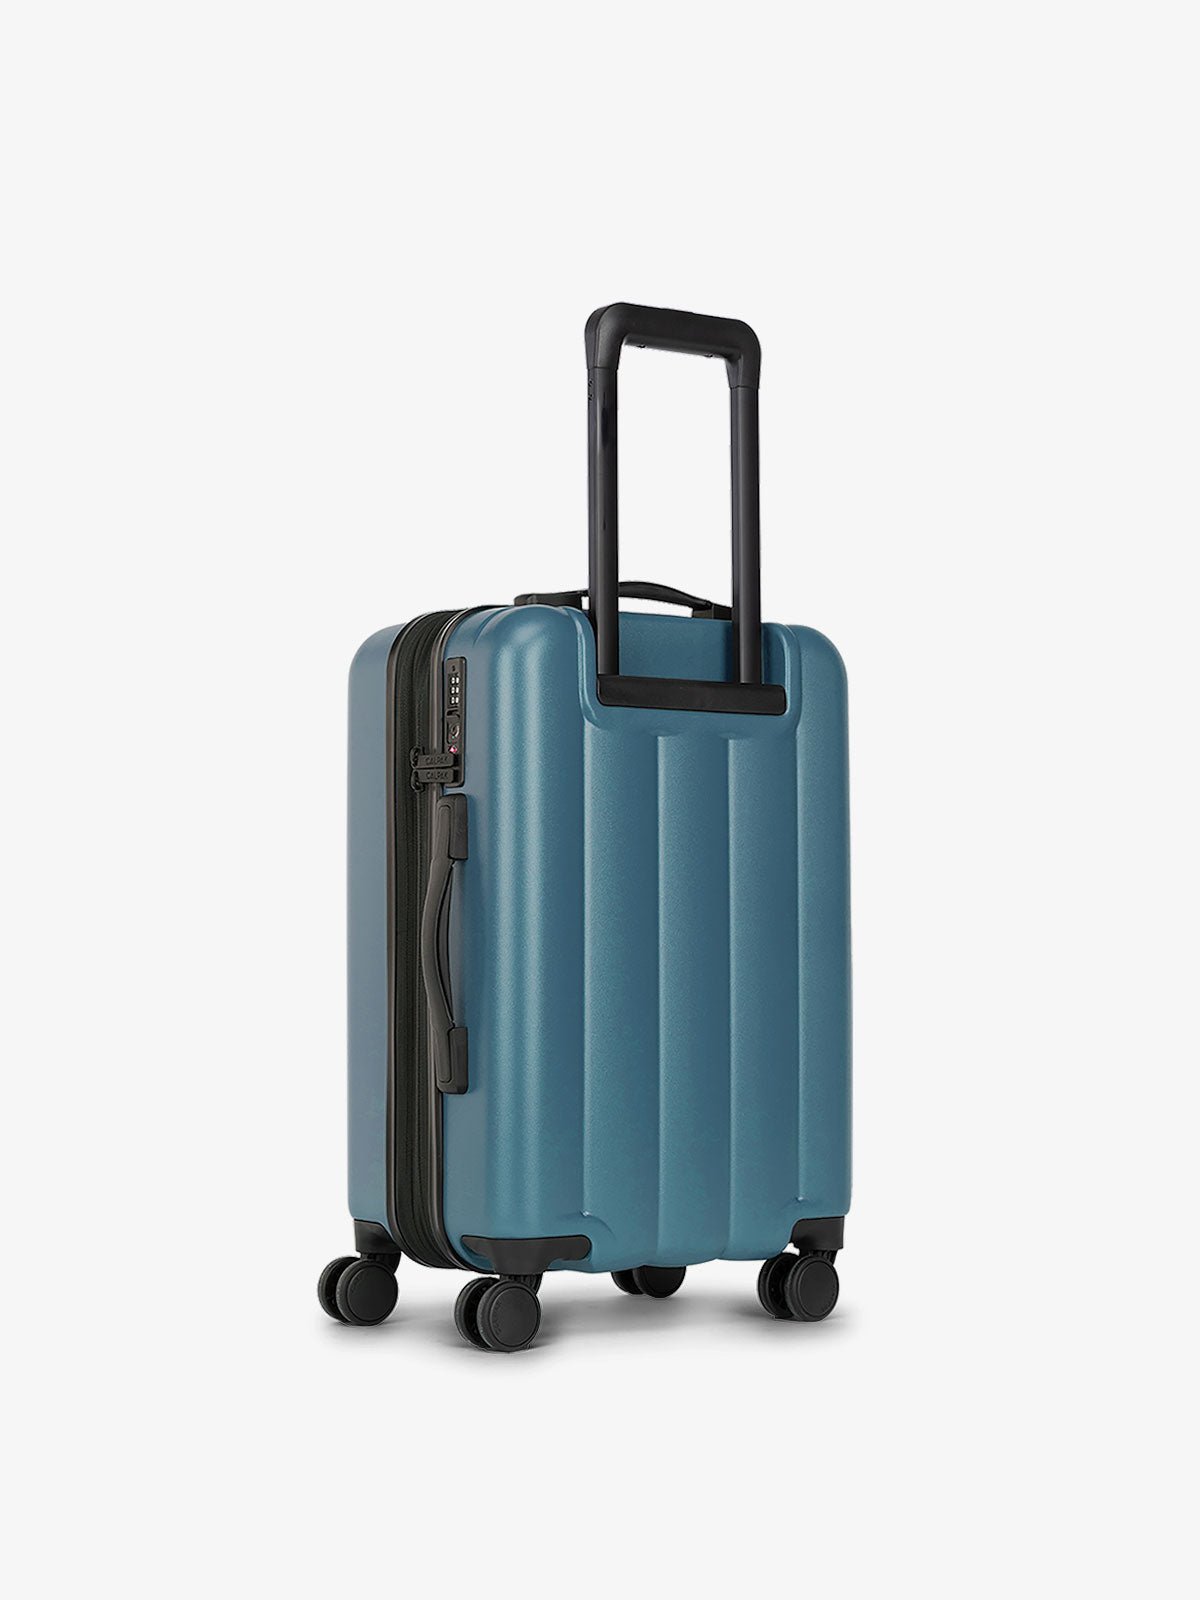 CALPAK carry-on luggage featuring dual spinner wheels and bottom grab handle in pacific